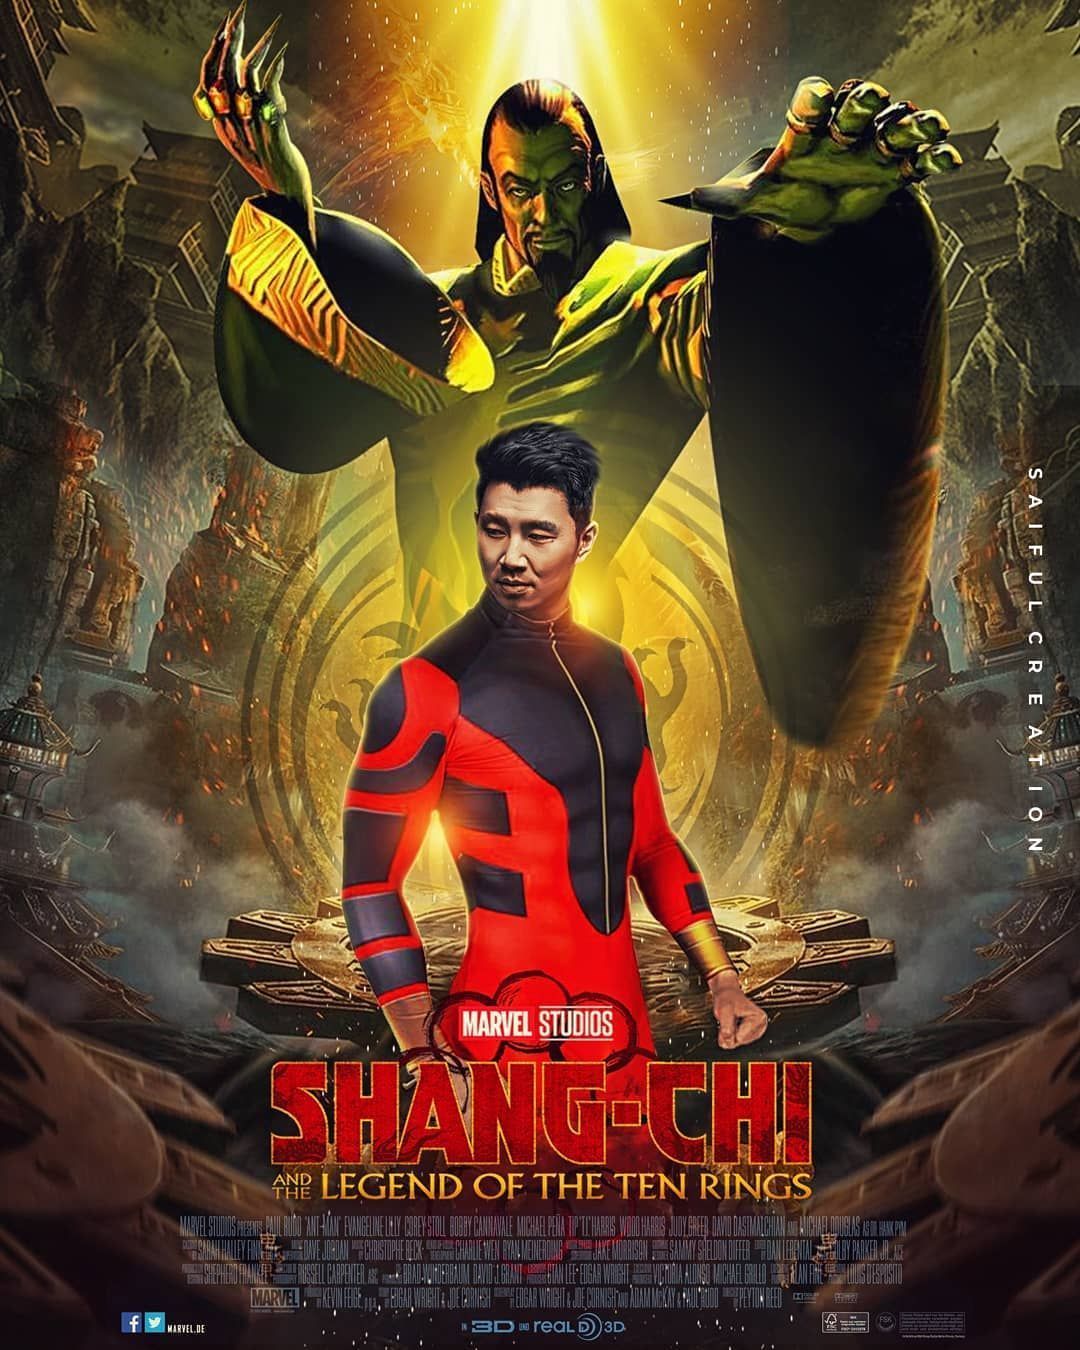 Marvel Studios HD Shang-Chi And The Legend Of The Ten Rings Wallpapers